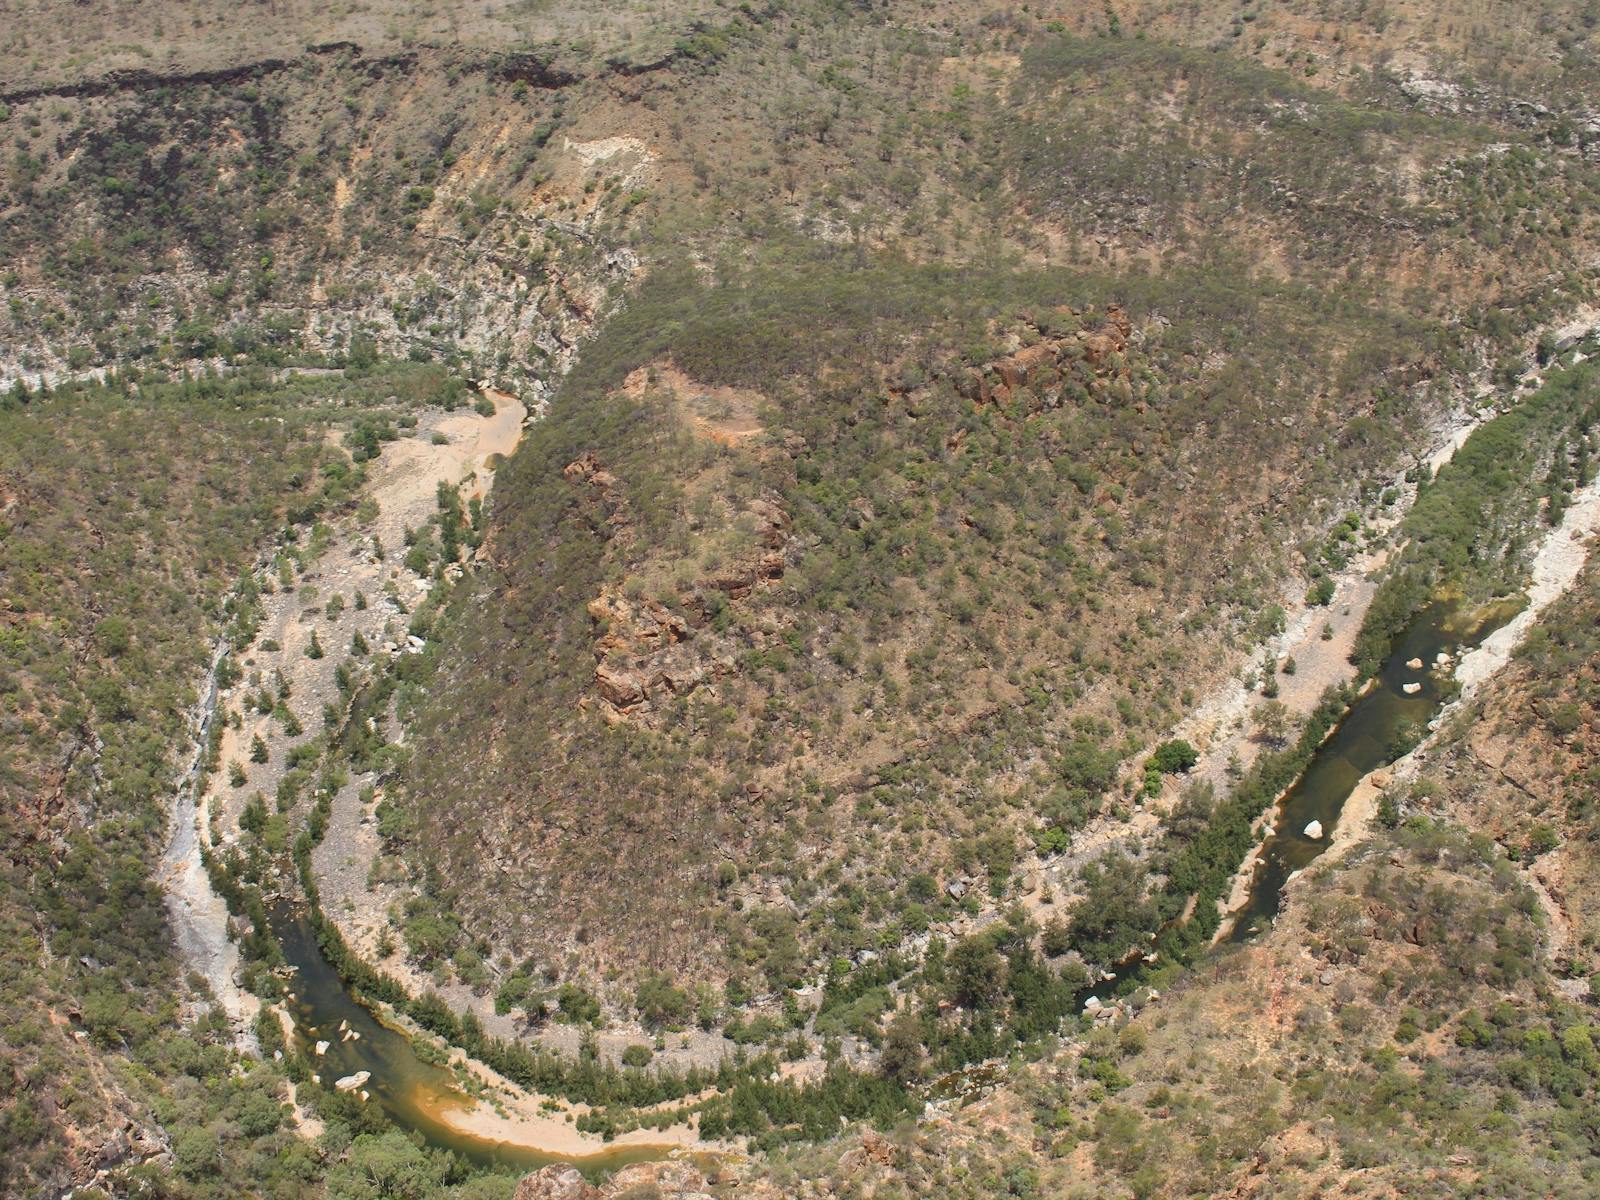 Looking down at a bend in the river at Porcupine Gorge NP